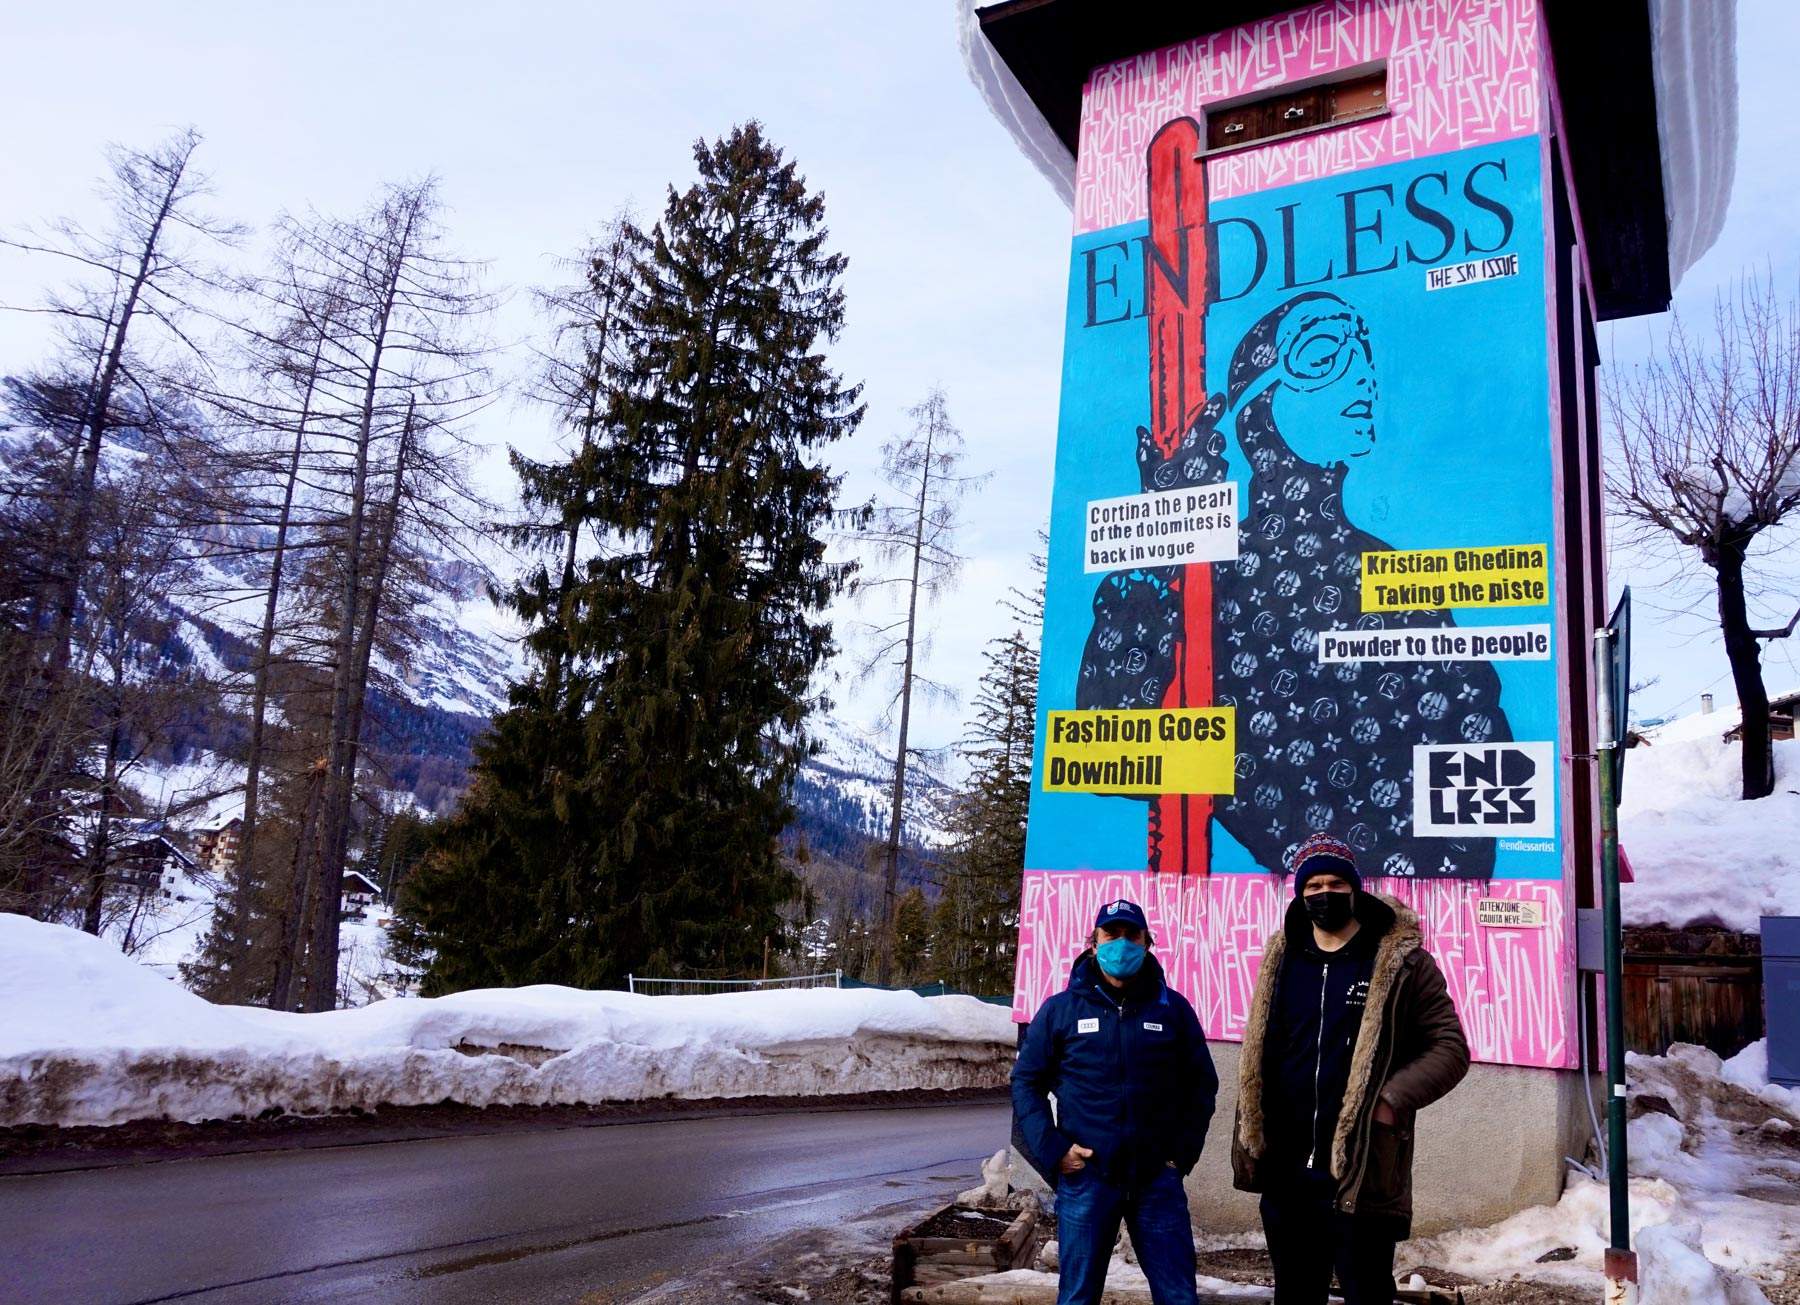 Street artist Endless creates a mural in Cortina d'Ampezzo for the World Ski Championships